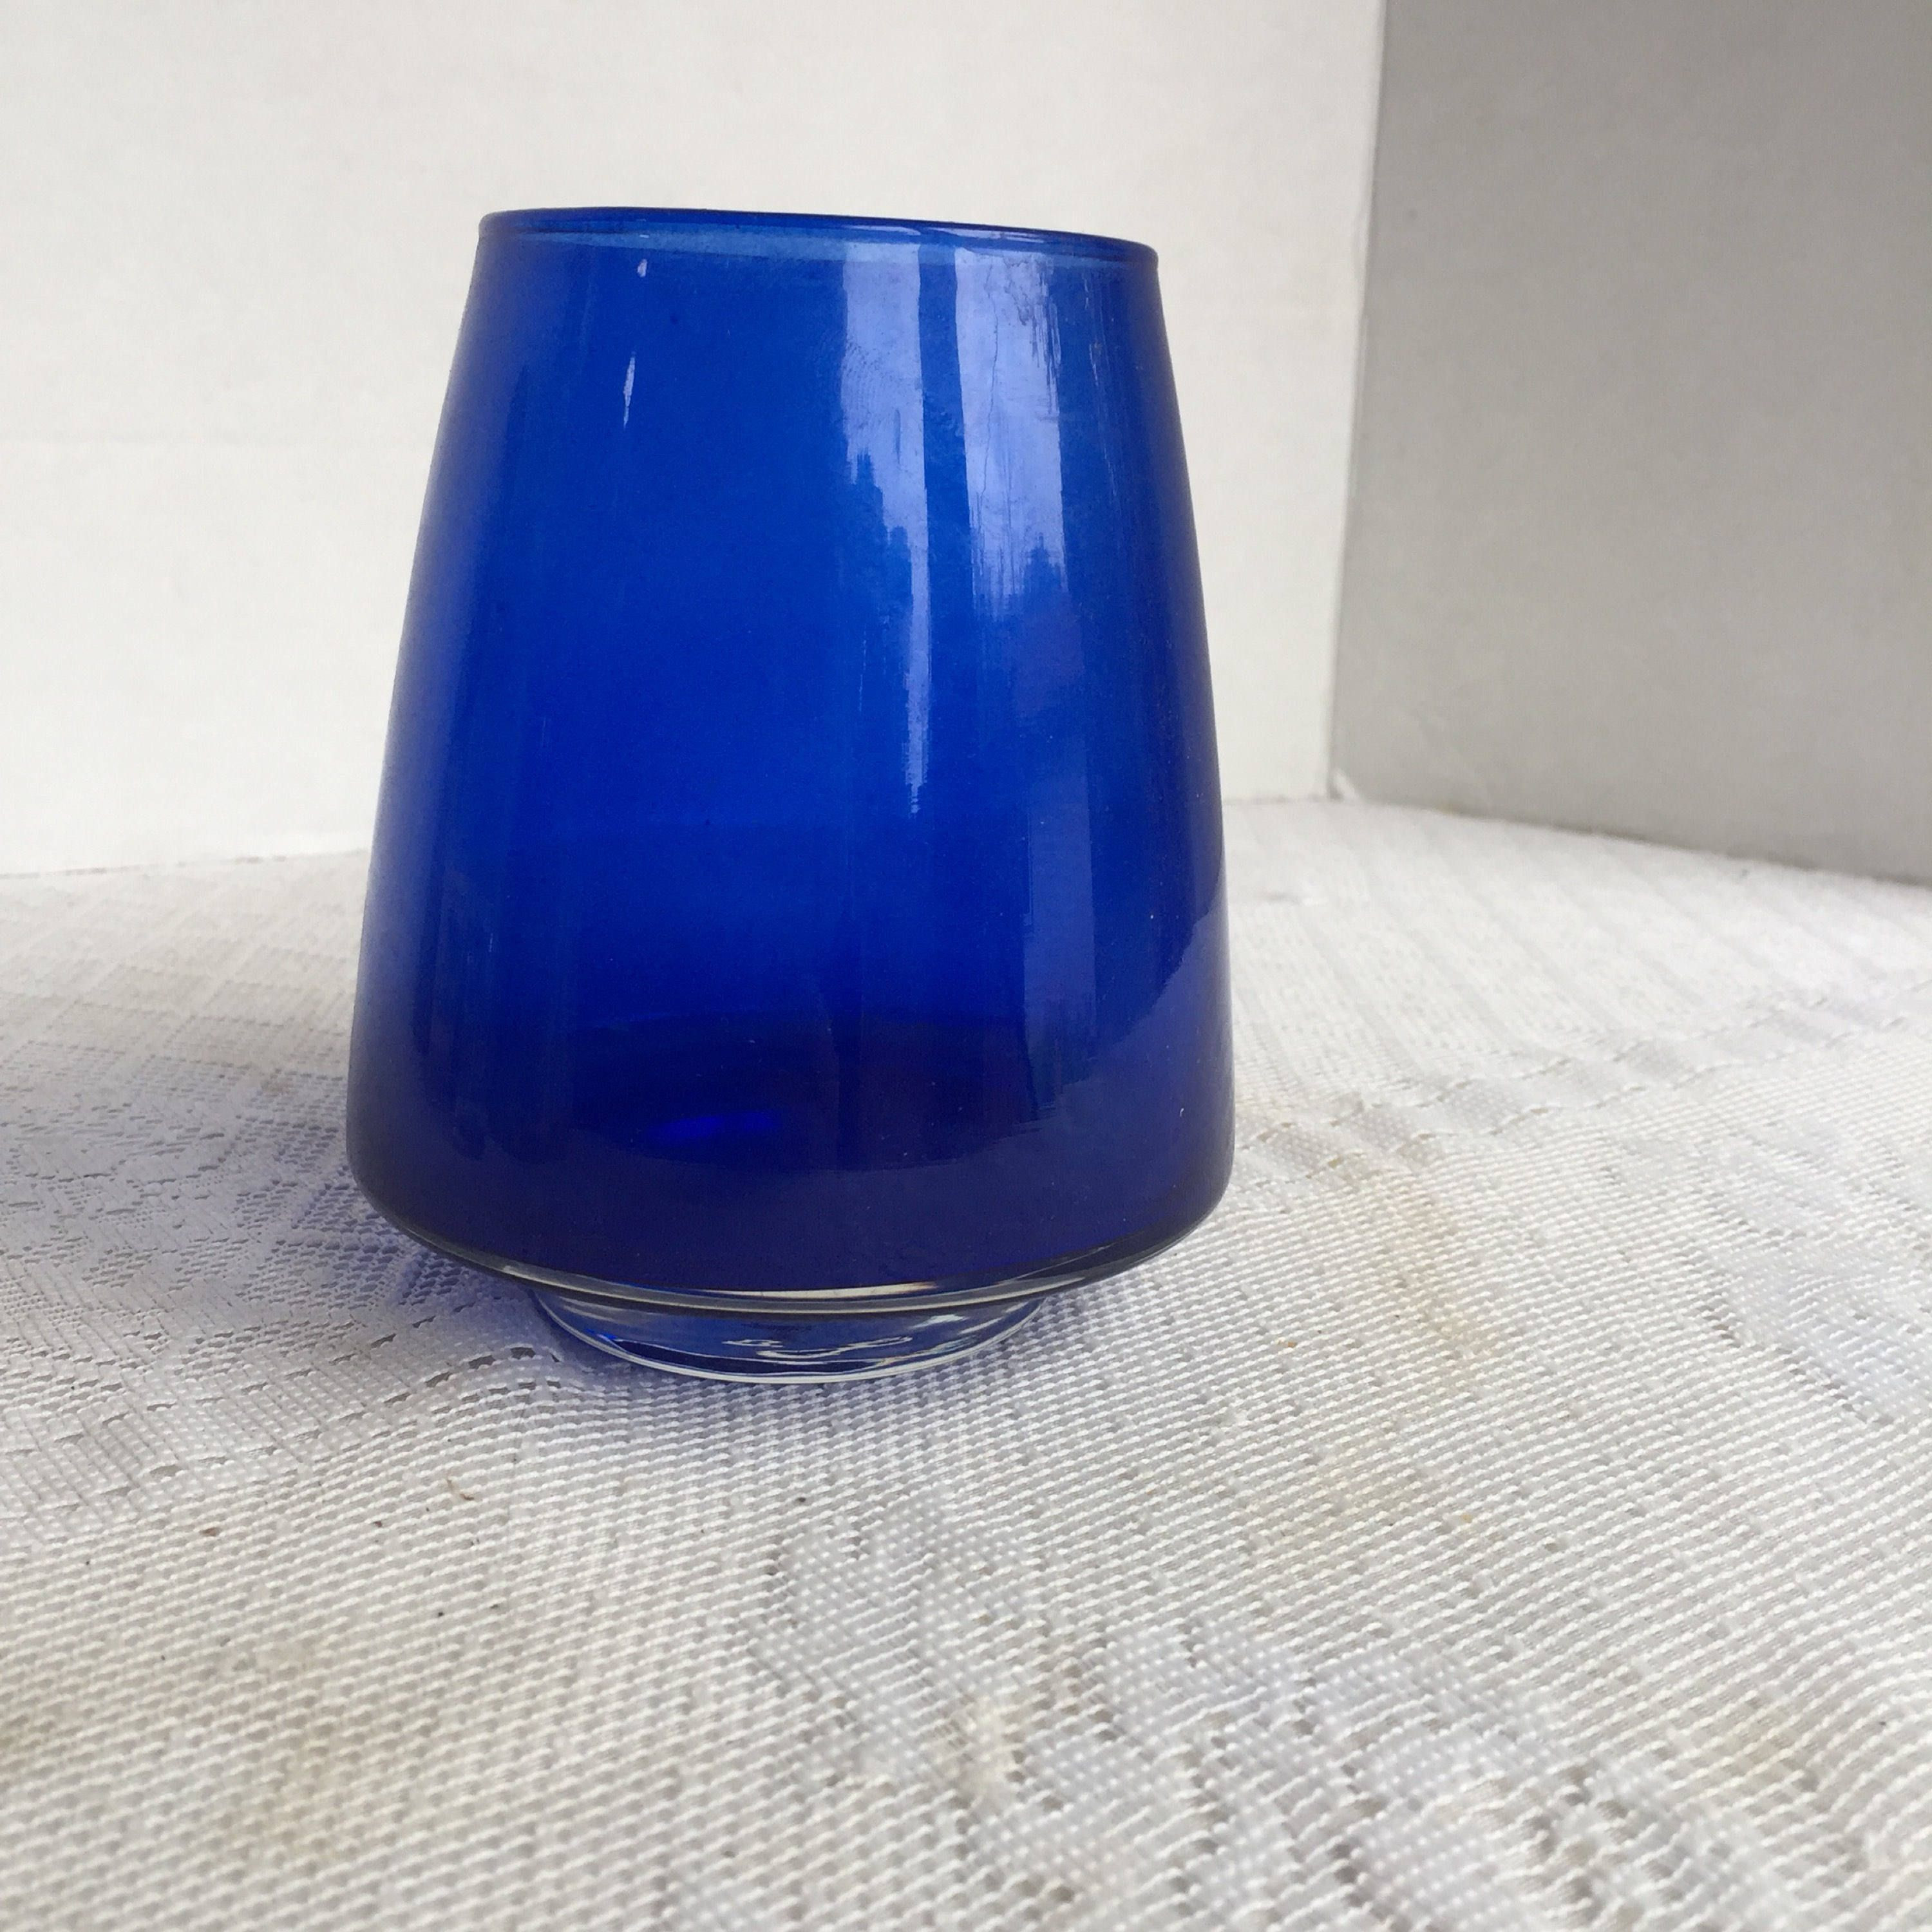 Recycled Glass Vase Of Cobalt Blue Glass Cone Shaped Vase Vintage Seventies Floral within Cobalt Blue Glass Cone Shaped Vase Vintage Seventies Floral Supplies by Vintagepoetic On Etsy